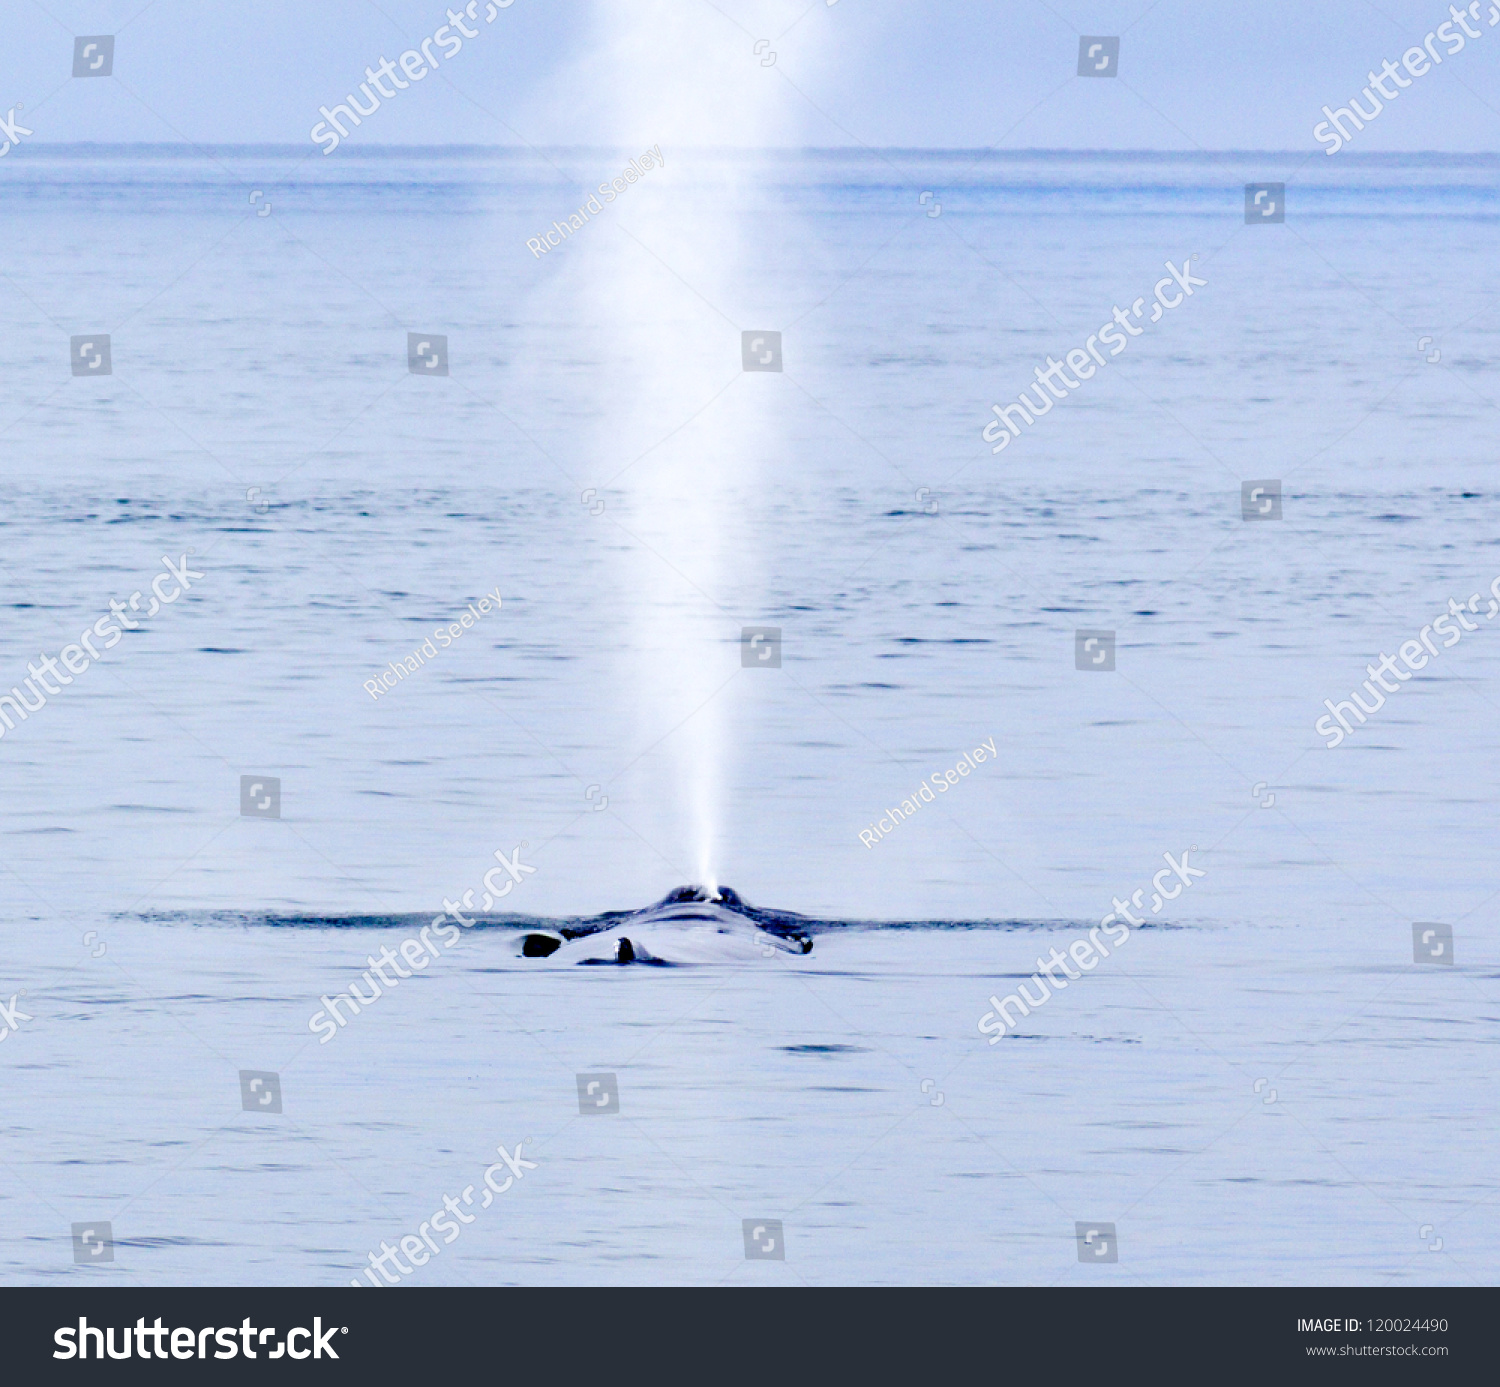 Humpback Geyser Humpback Whale Spout Looks Stock Photo (Safe to Use ...